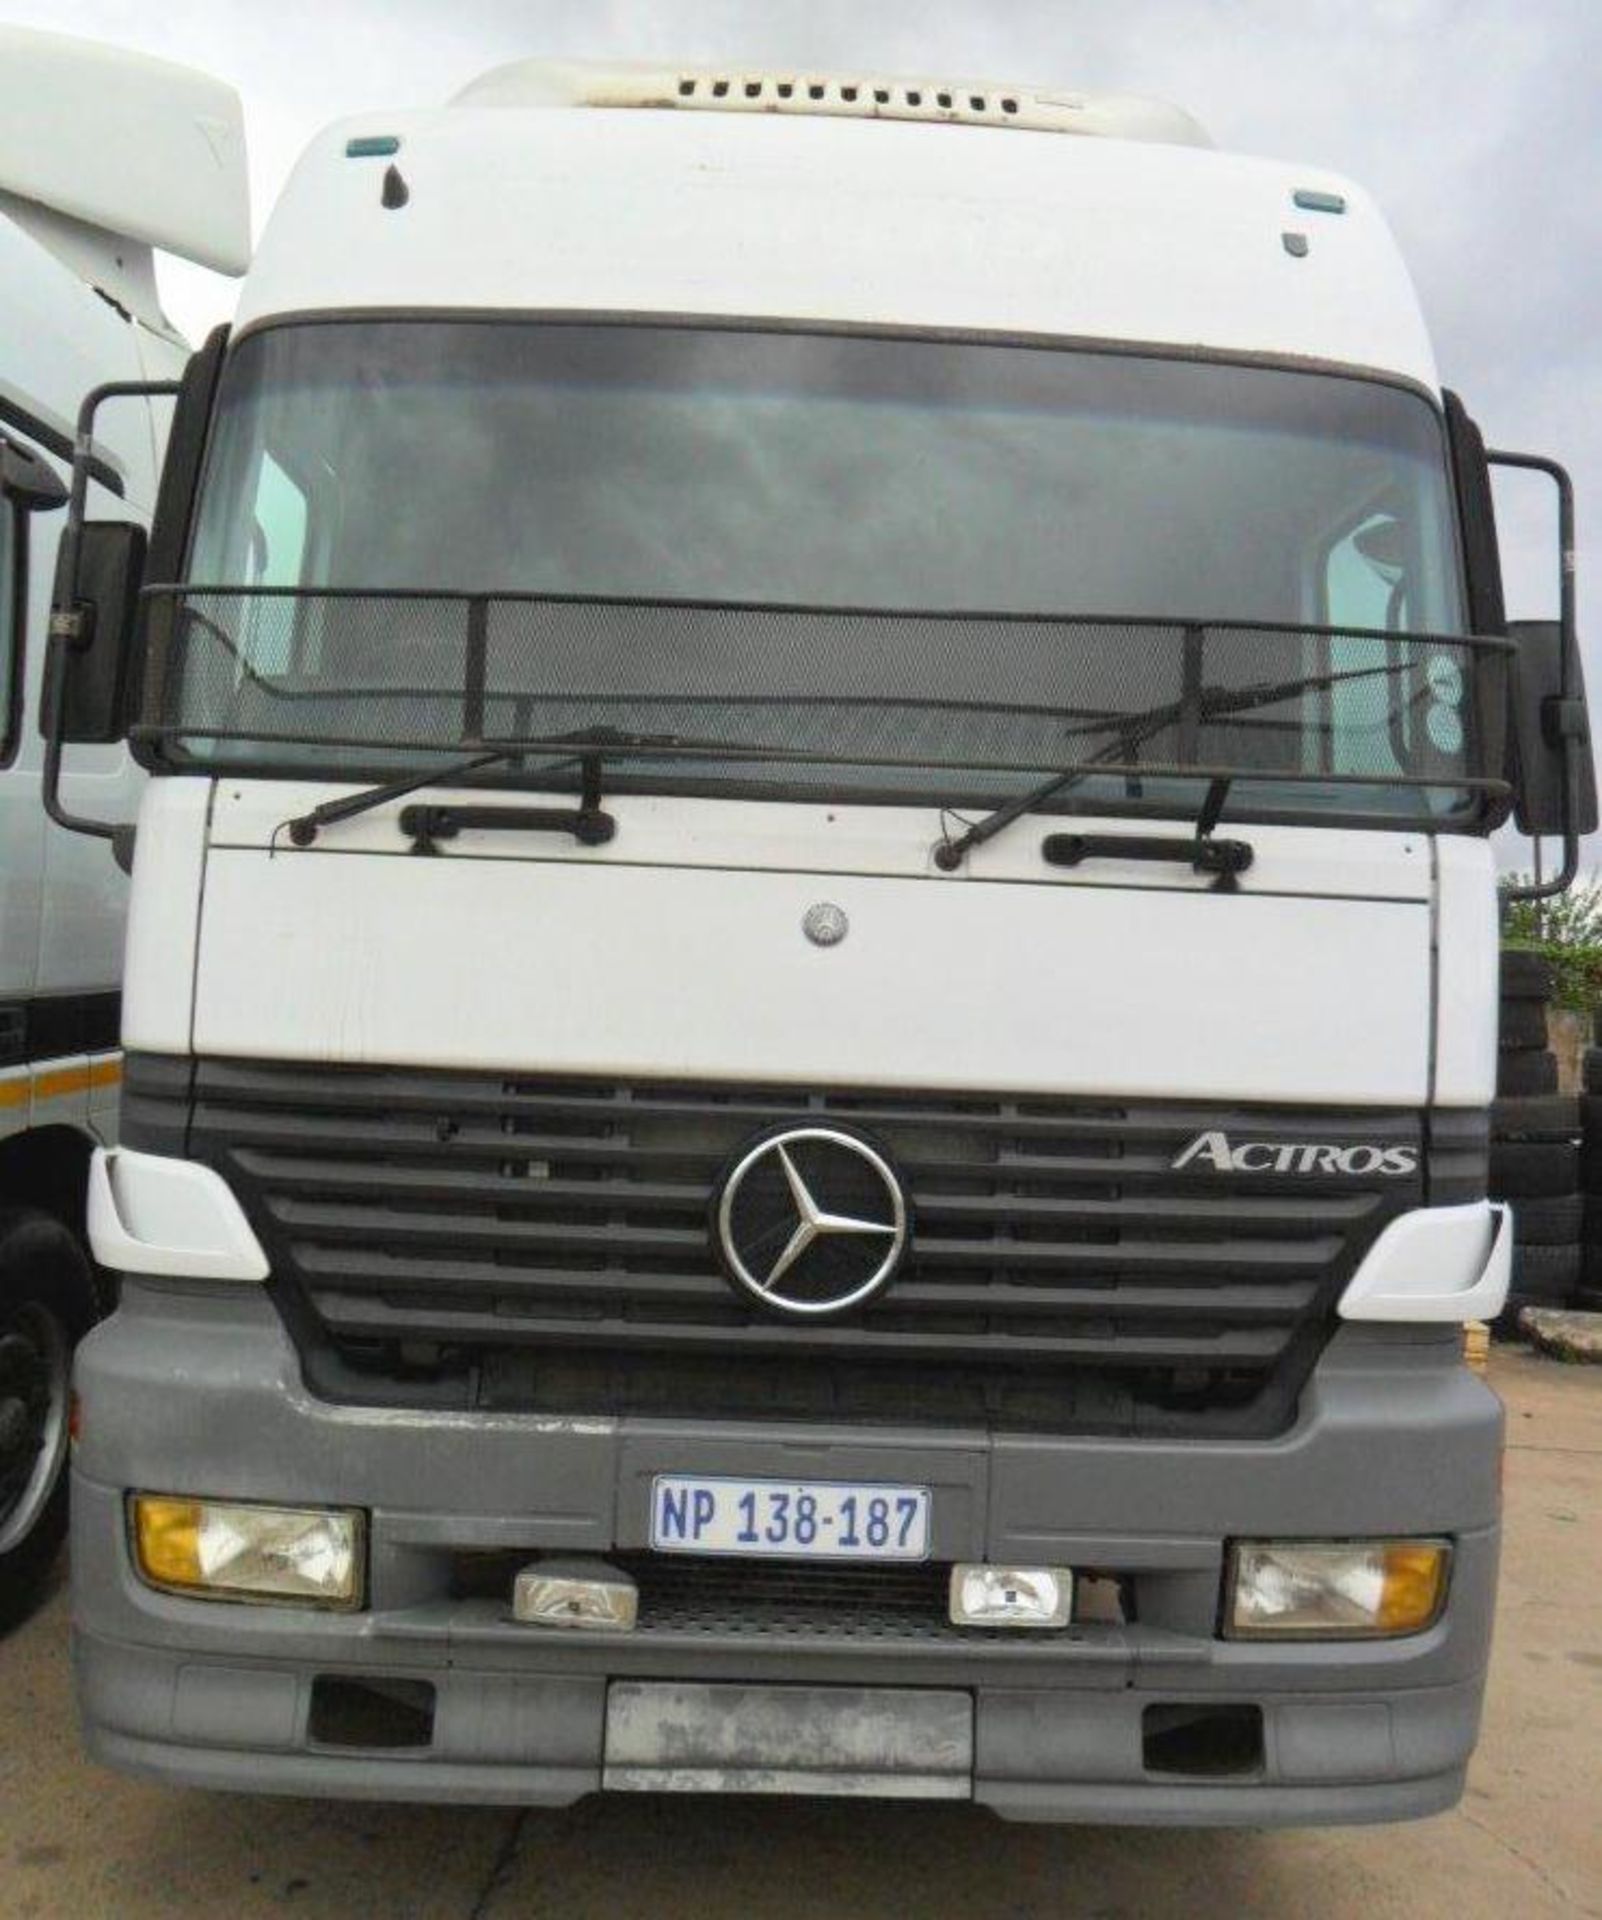 2001 M/BENZ ACTROS 2648 6X4 T/T - REG NO: NP138187 - (ITEM TO BE SOLD SUBJECT TO CONFIRMATION) - Image 8 of 10